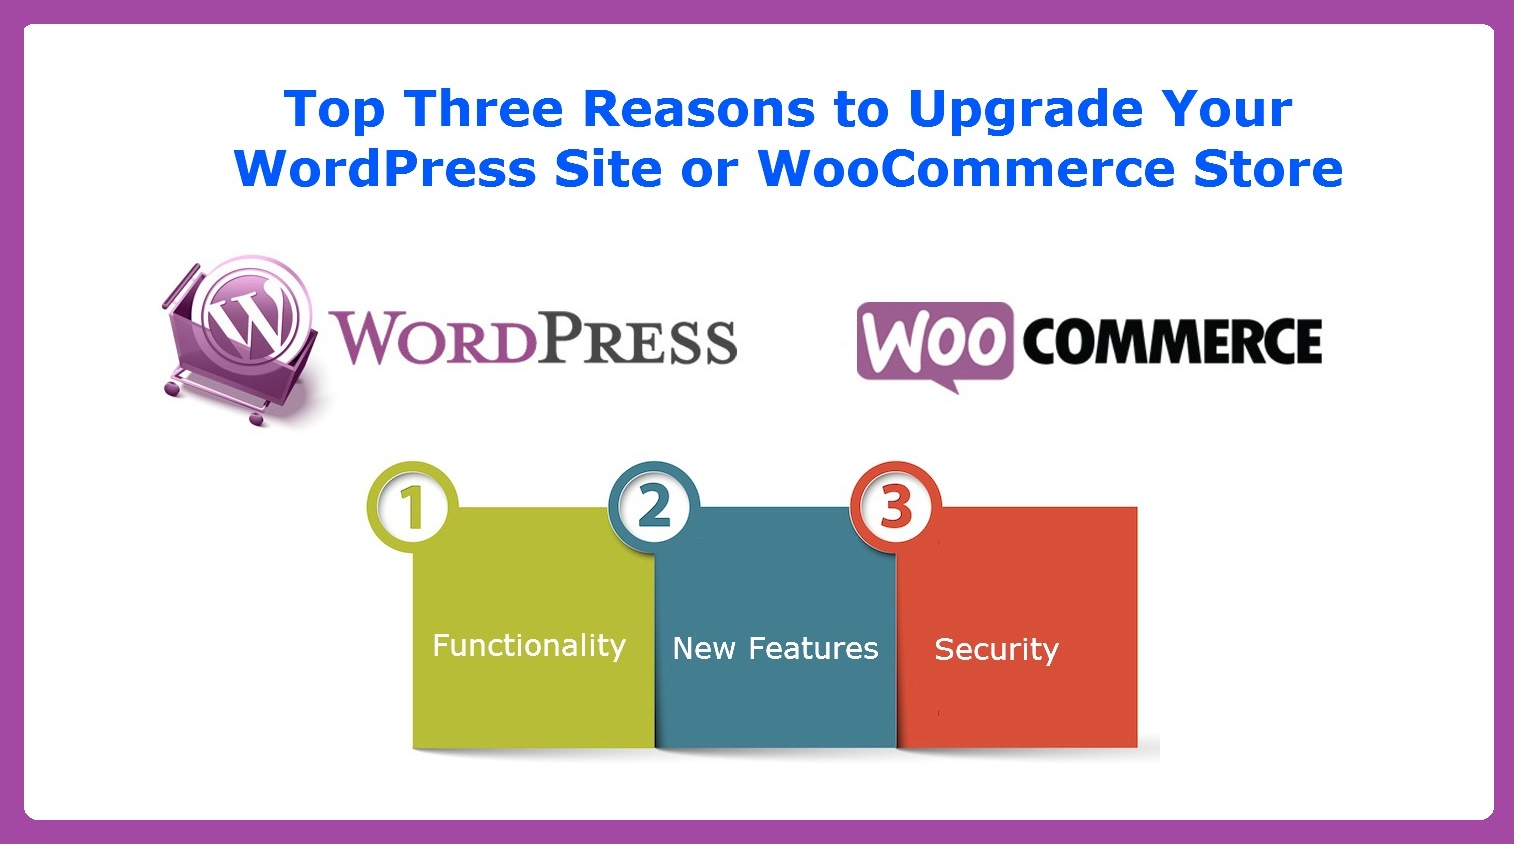 Top Three Reasons to Upgrade Your WordPress Site or WooCommerce Store